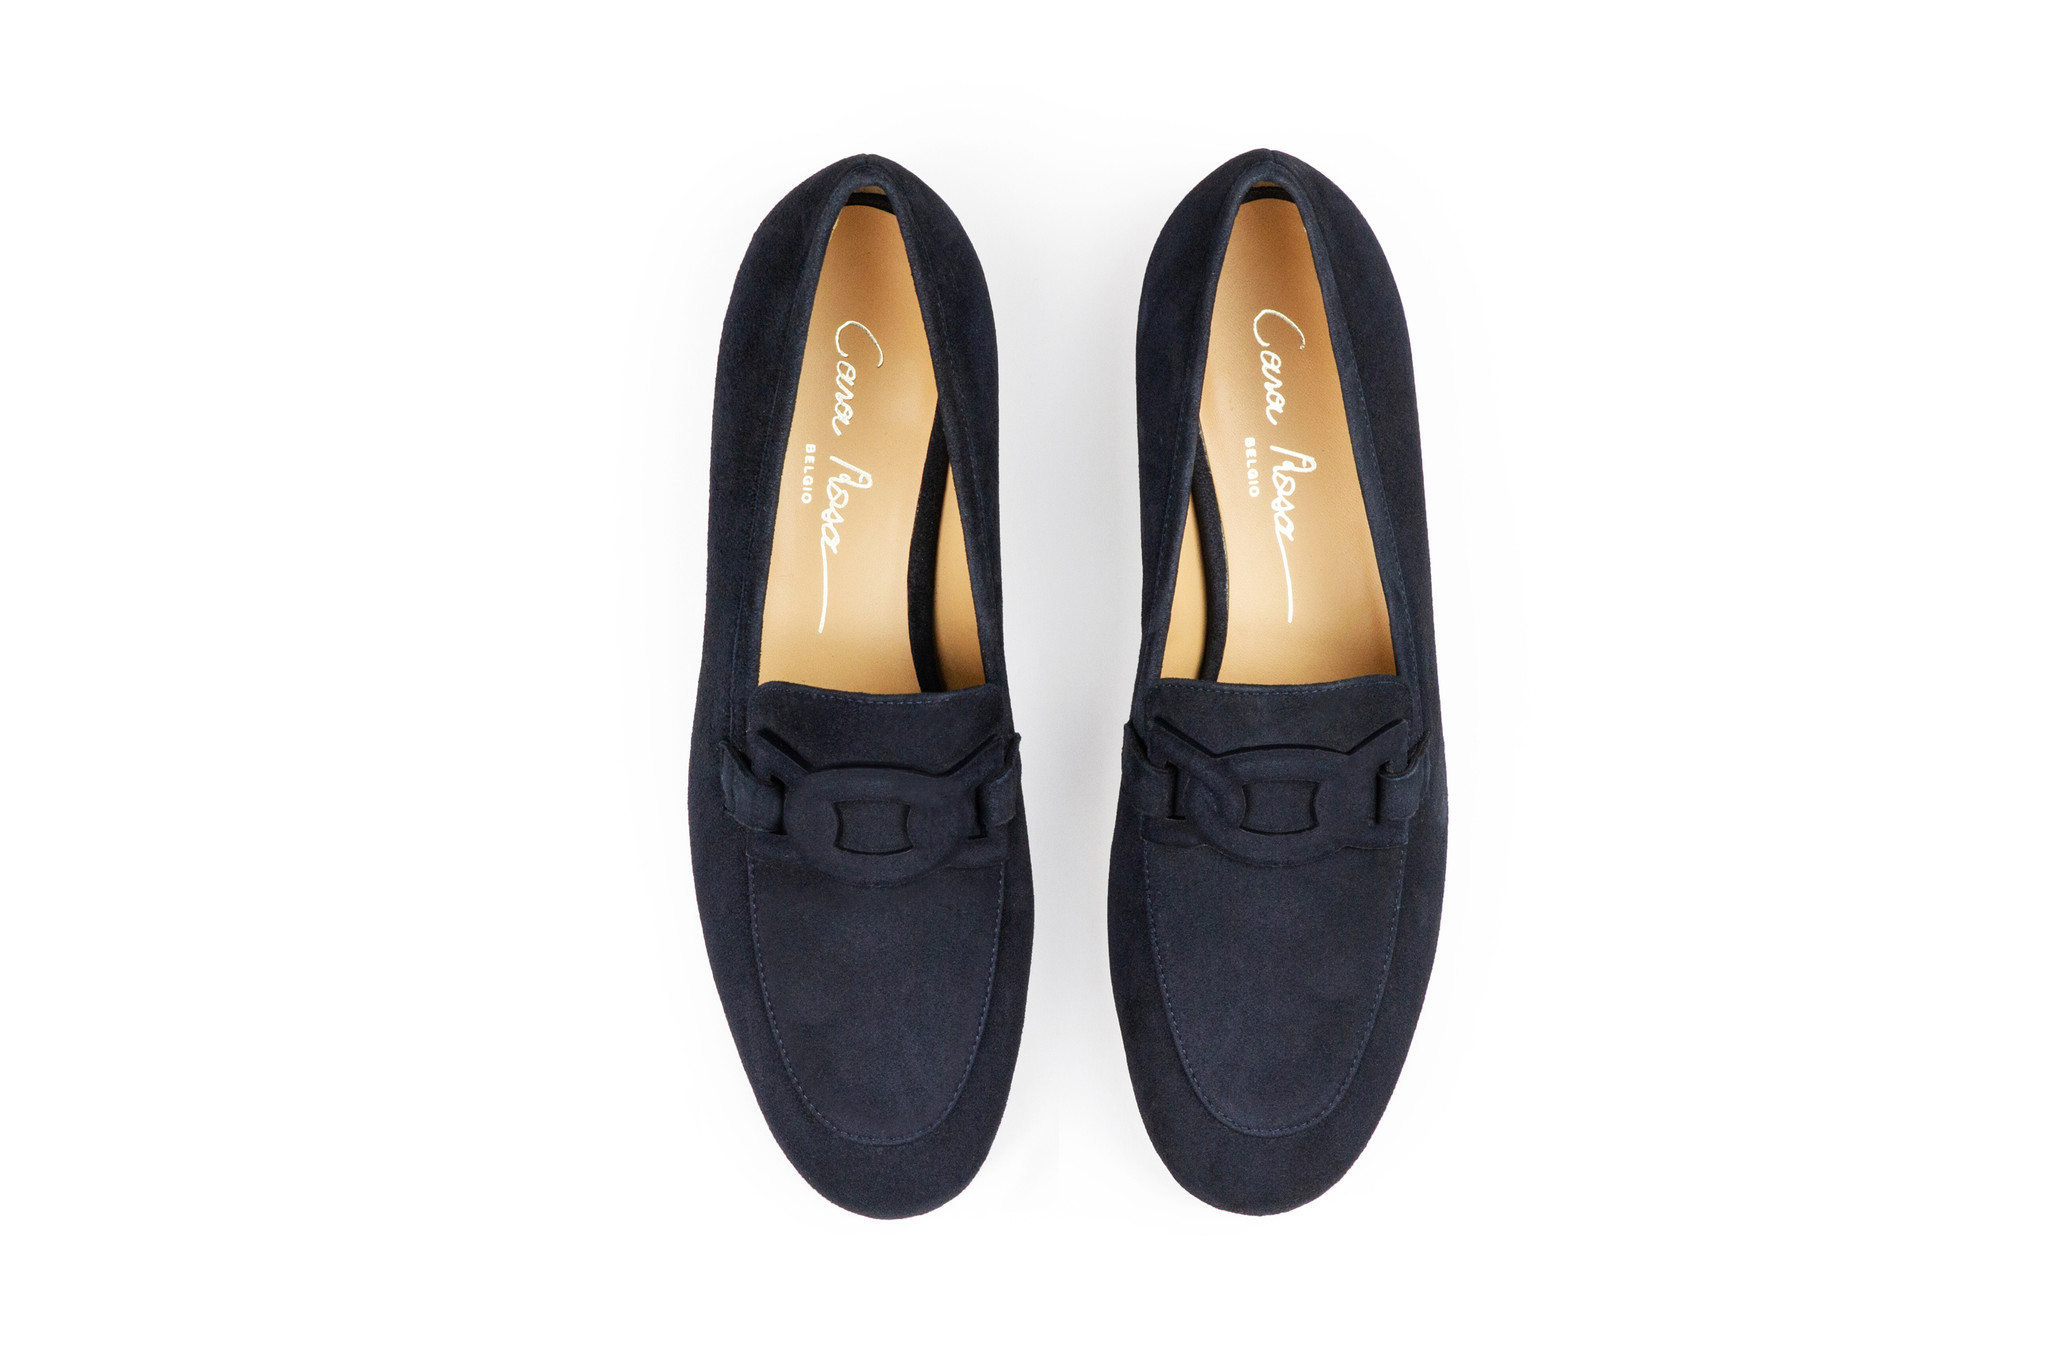 Marsala loafer for women navy blue suede leather -